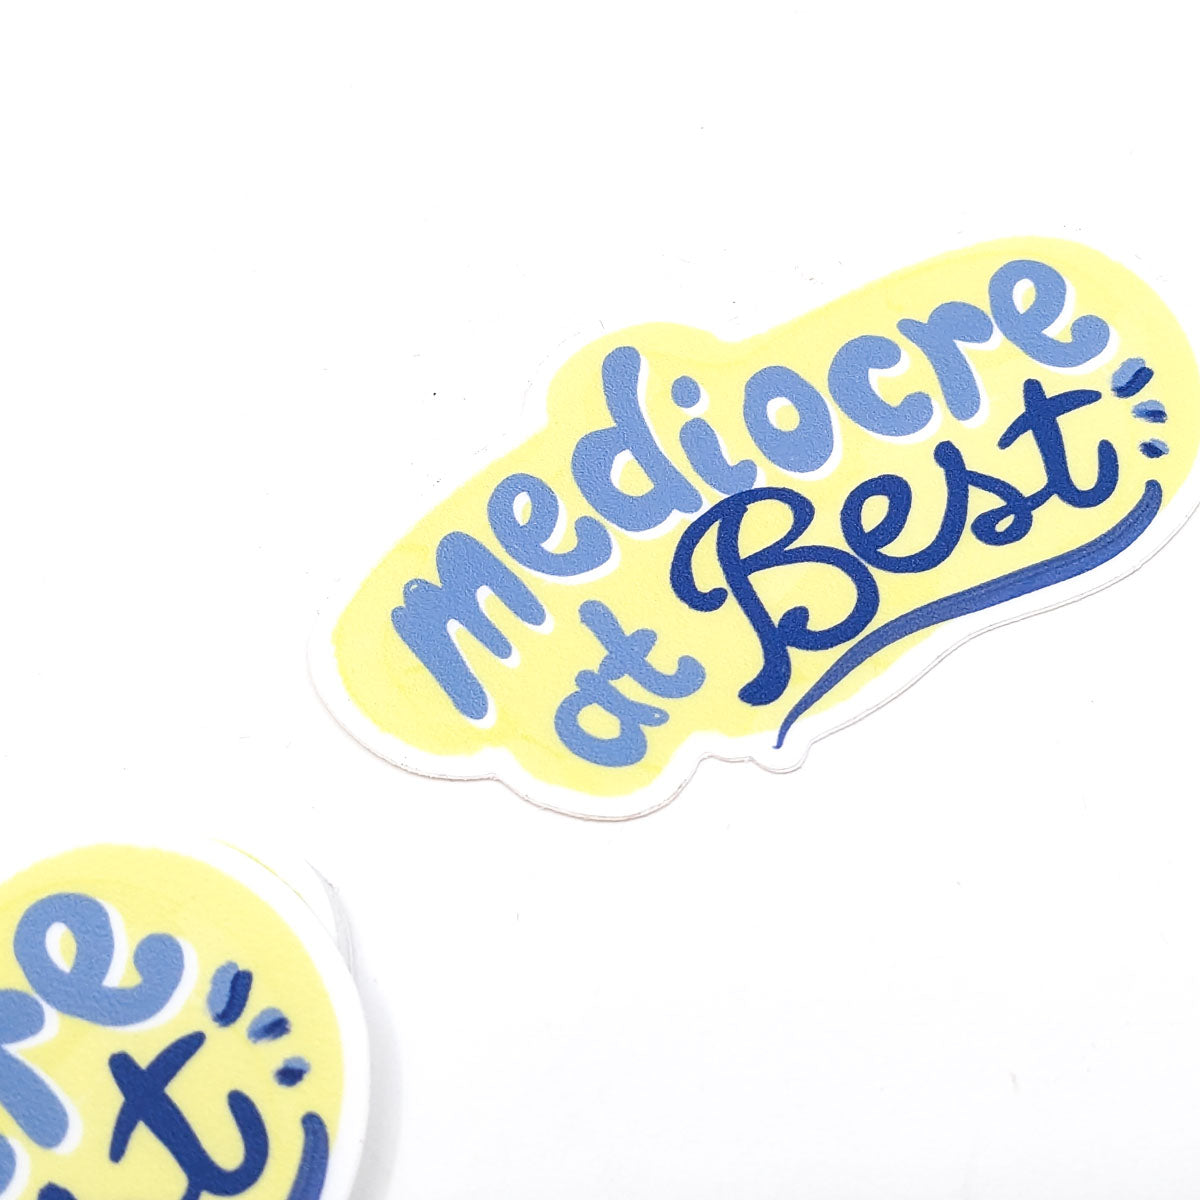 Mediocre at Best- Sticker